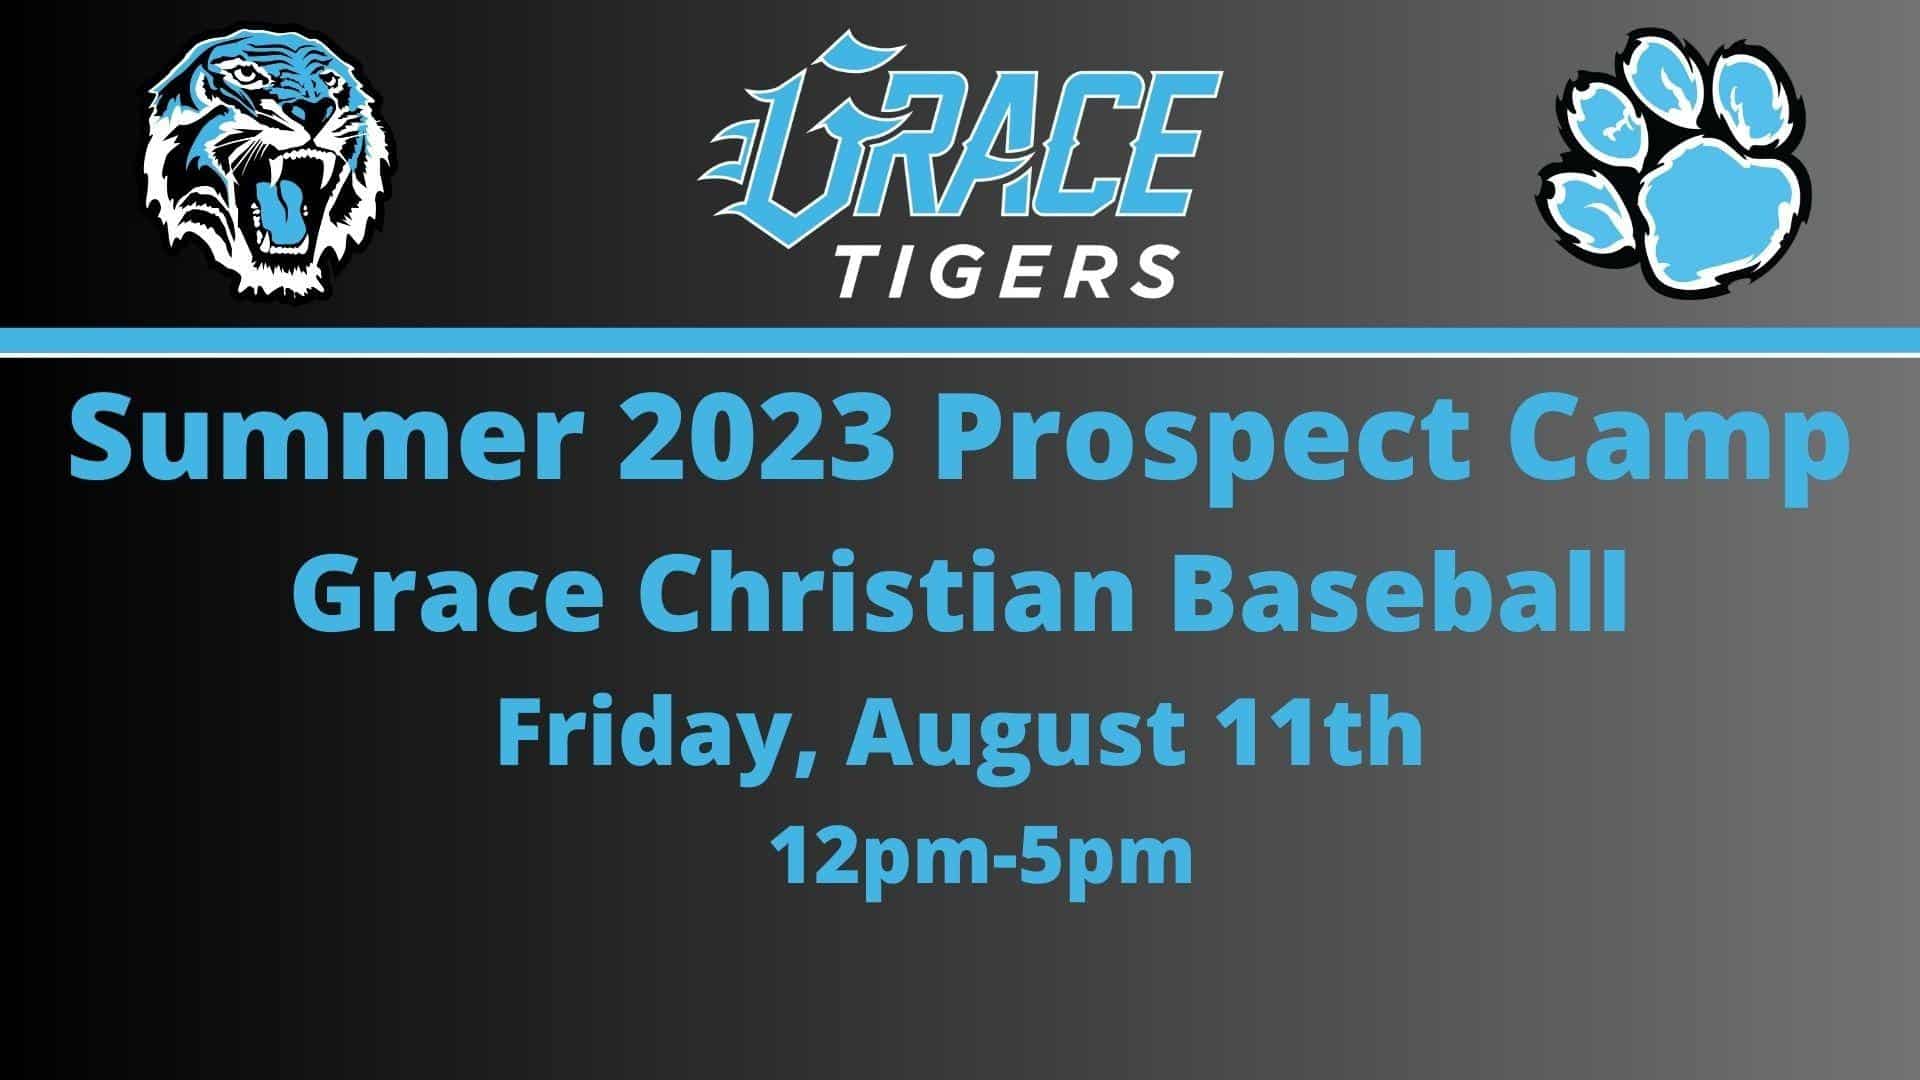 Baseball Set To Hold Prospect Camp In August